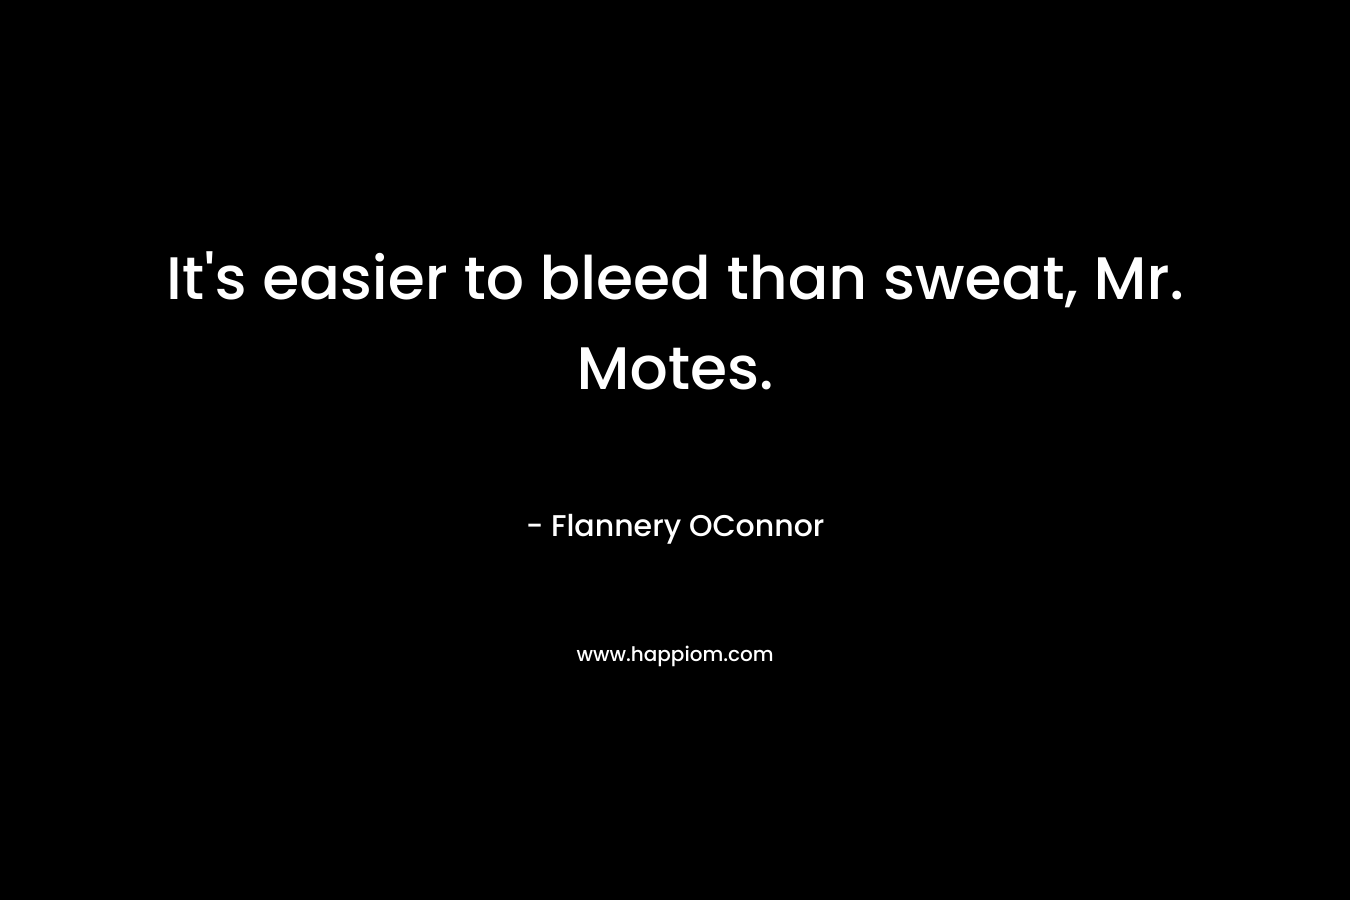 It’s easier to bleed than sweat, Mr. Motes. – Flannery OConnor